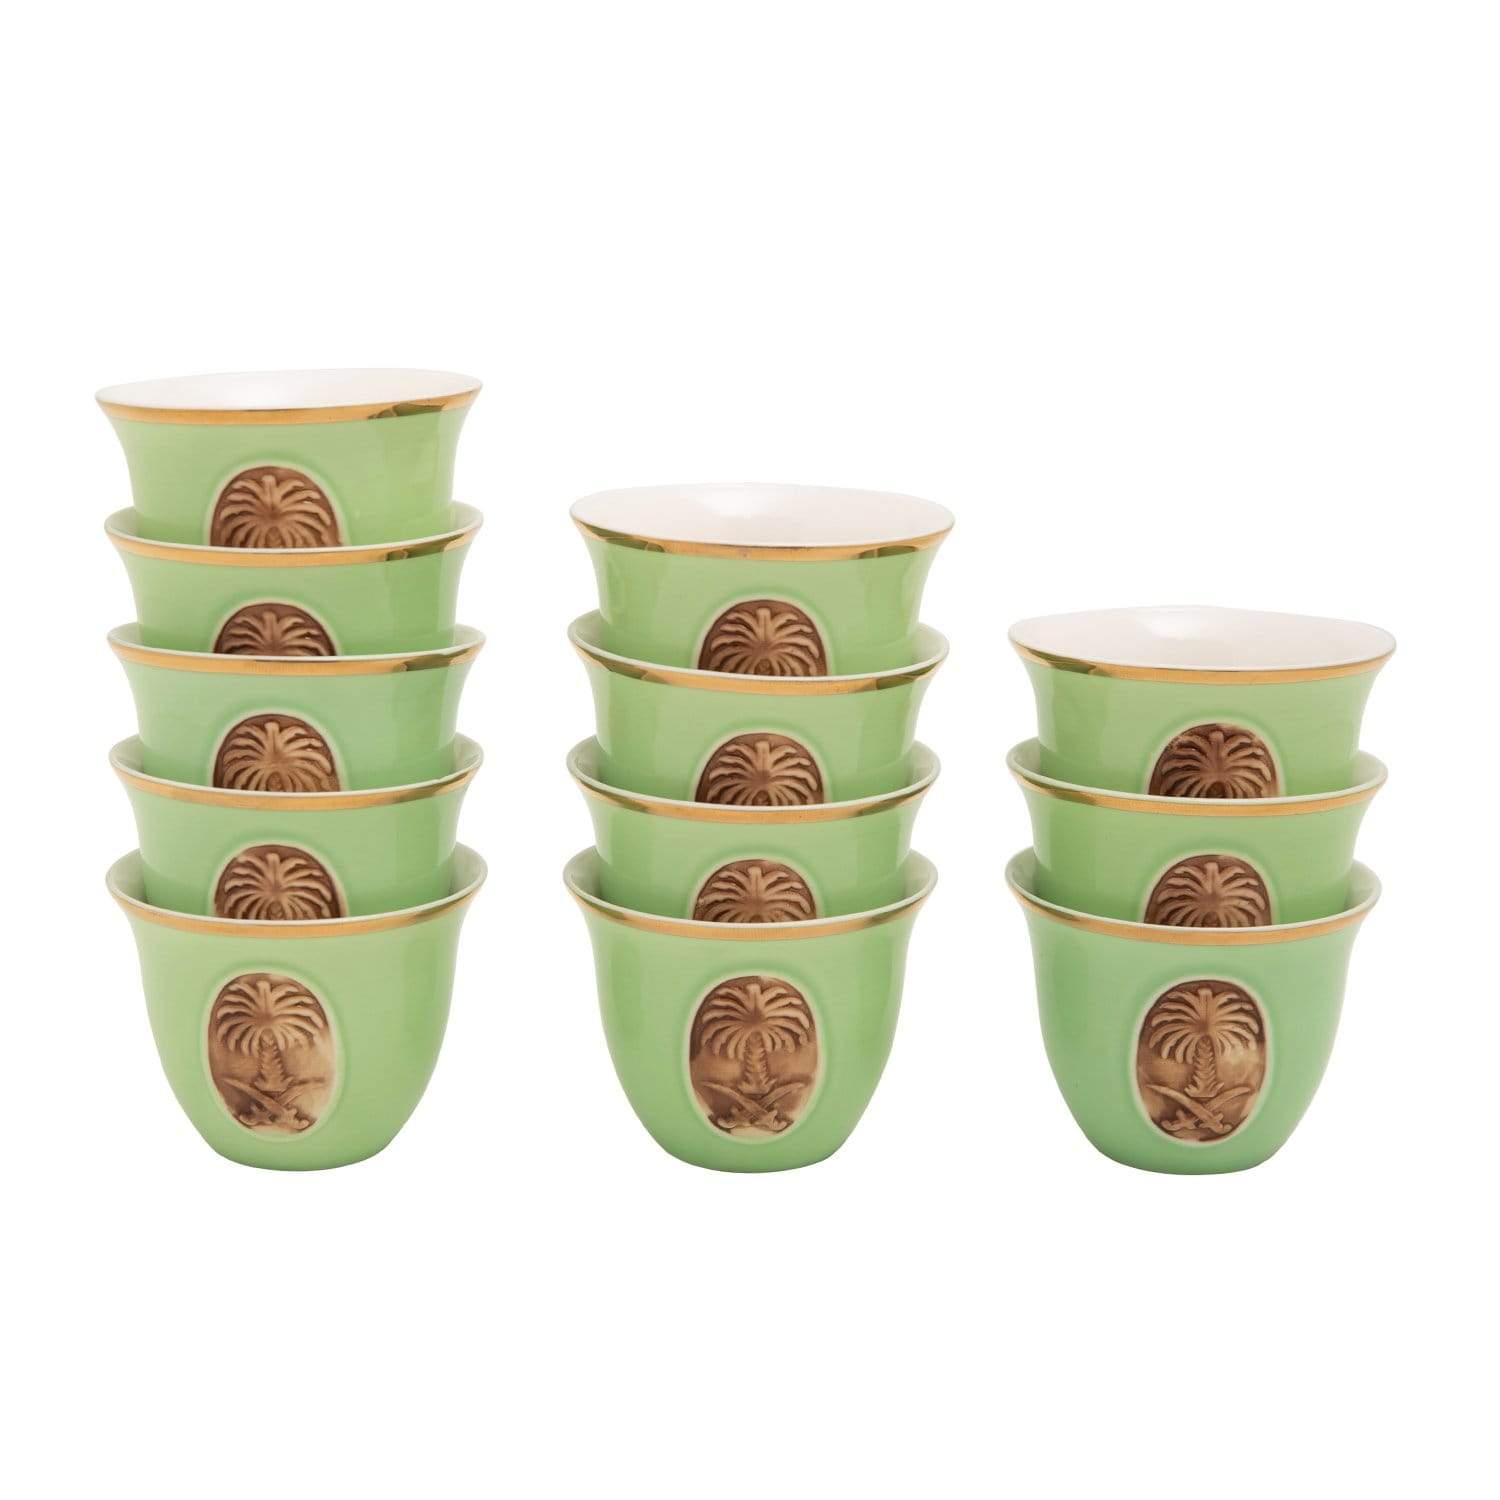 BANBERRY PORCELAIN 12PC CAWA CUPS BC GRN GOLD LINE - SC010B